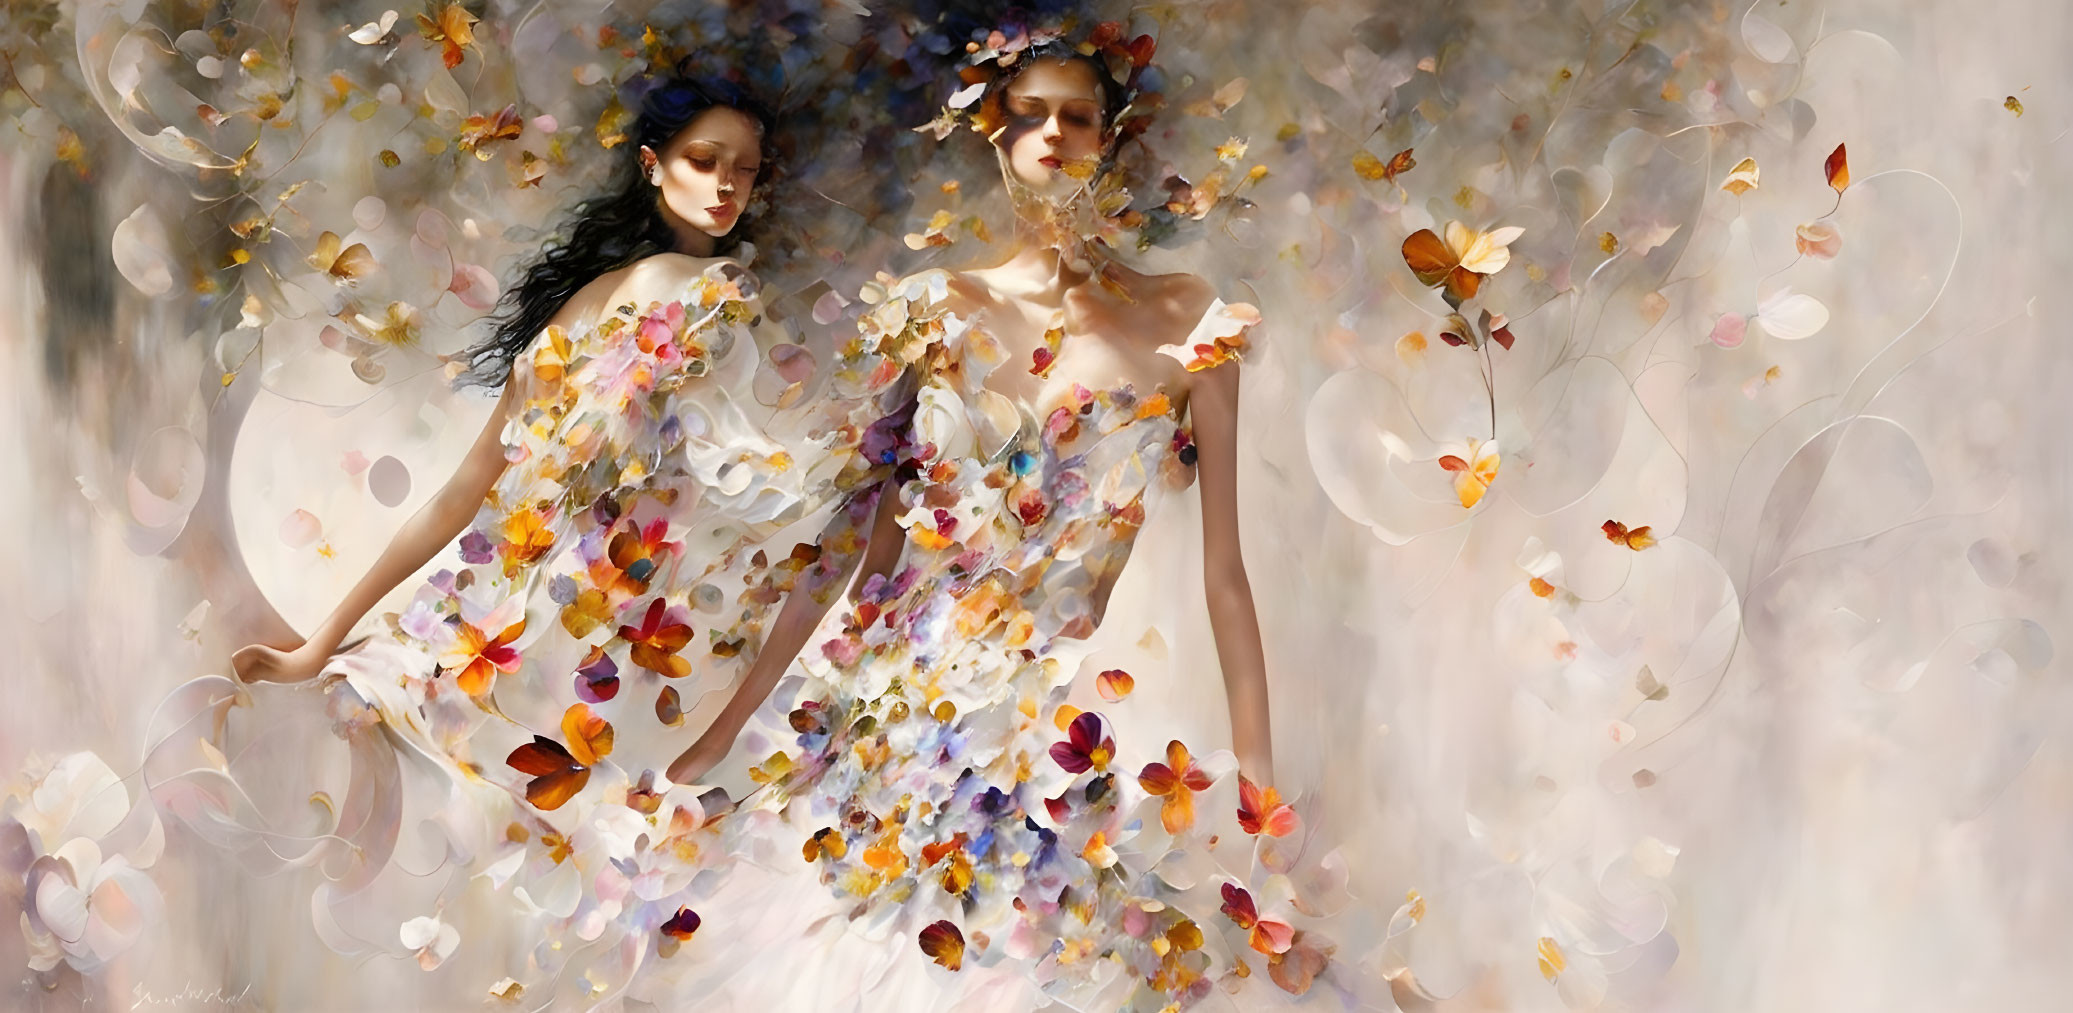 Two women in floral dresses surrounded by butterflies and flowers in soft-focused setting.